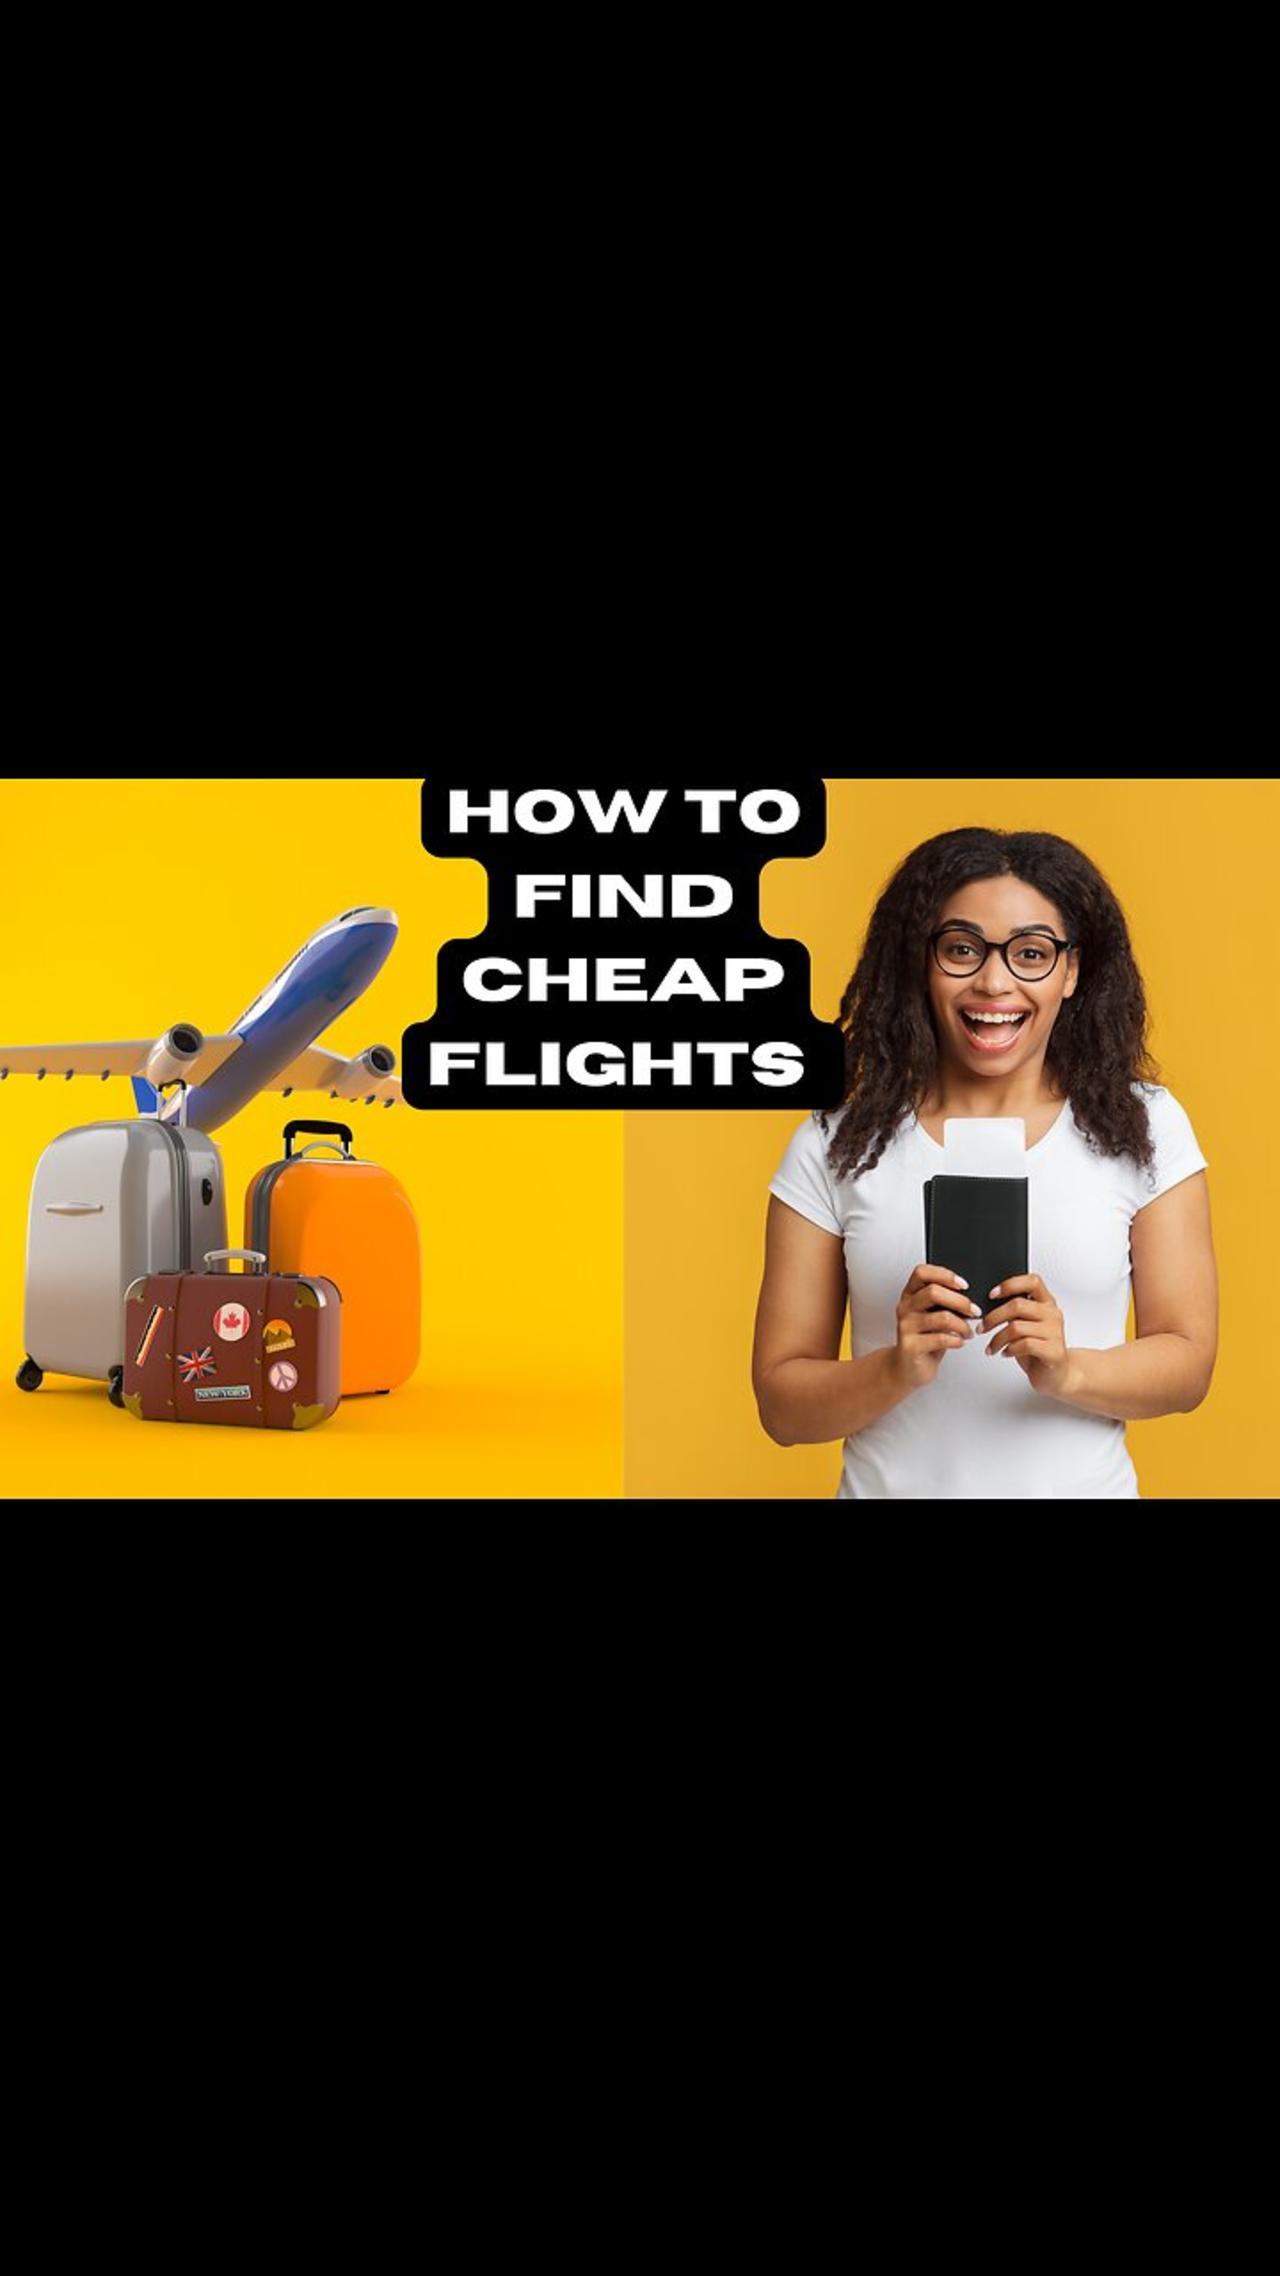 HOW TO FIND CHEAP FLIGHTS